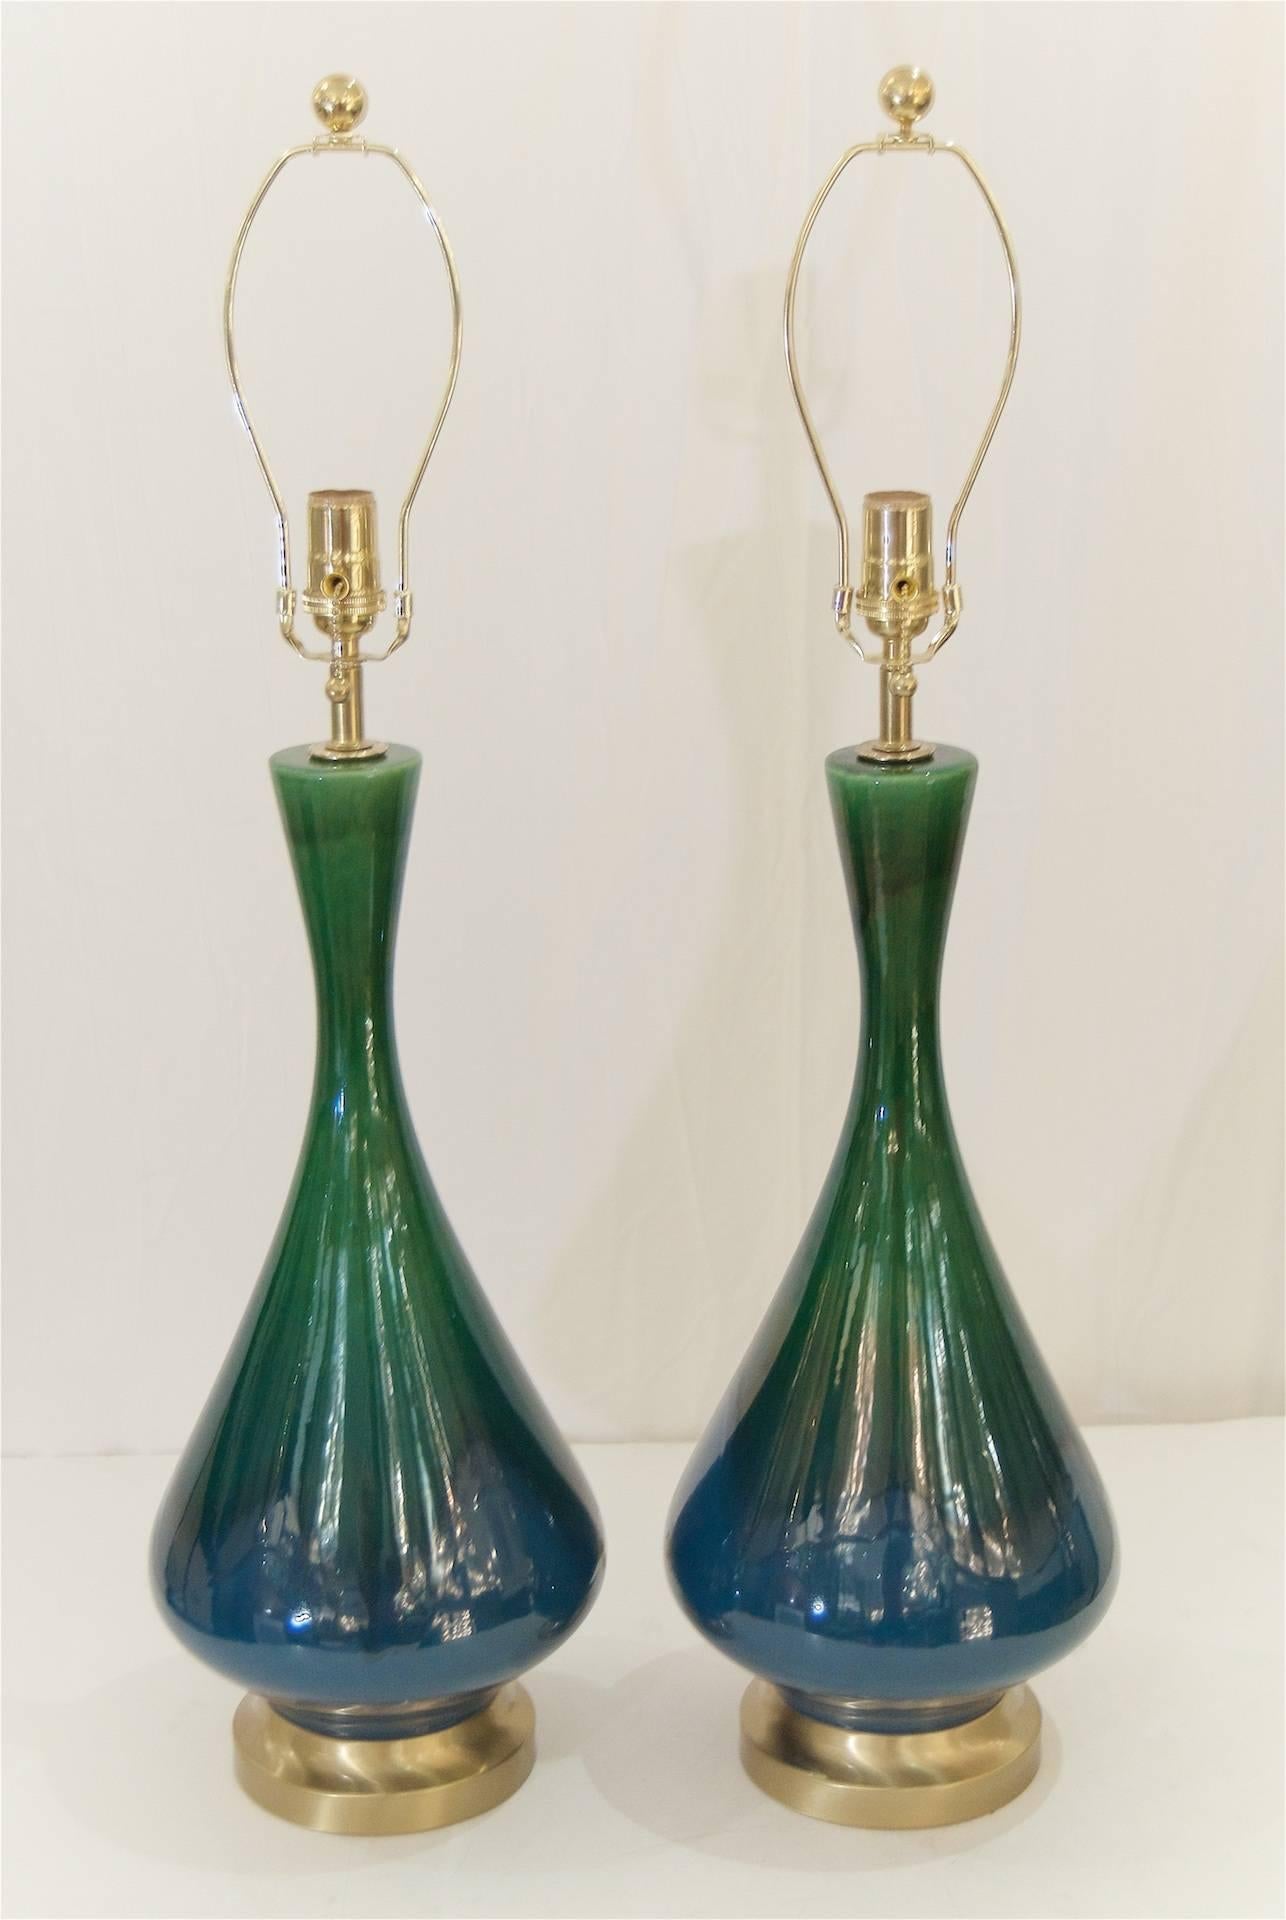 Excellent pair of elegantly formed Mid-Century glazed ceramic lamps with brushed brass hardware by Royal Haeger. 

New wiring. Lamp shades are for display purposes only and are not included. 

New sockets and wiring. Overall height to the top of the